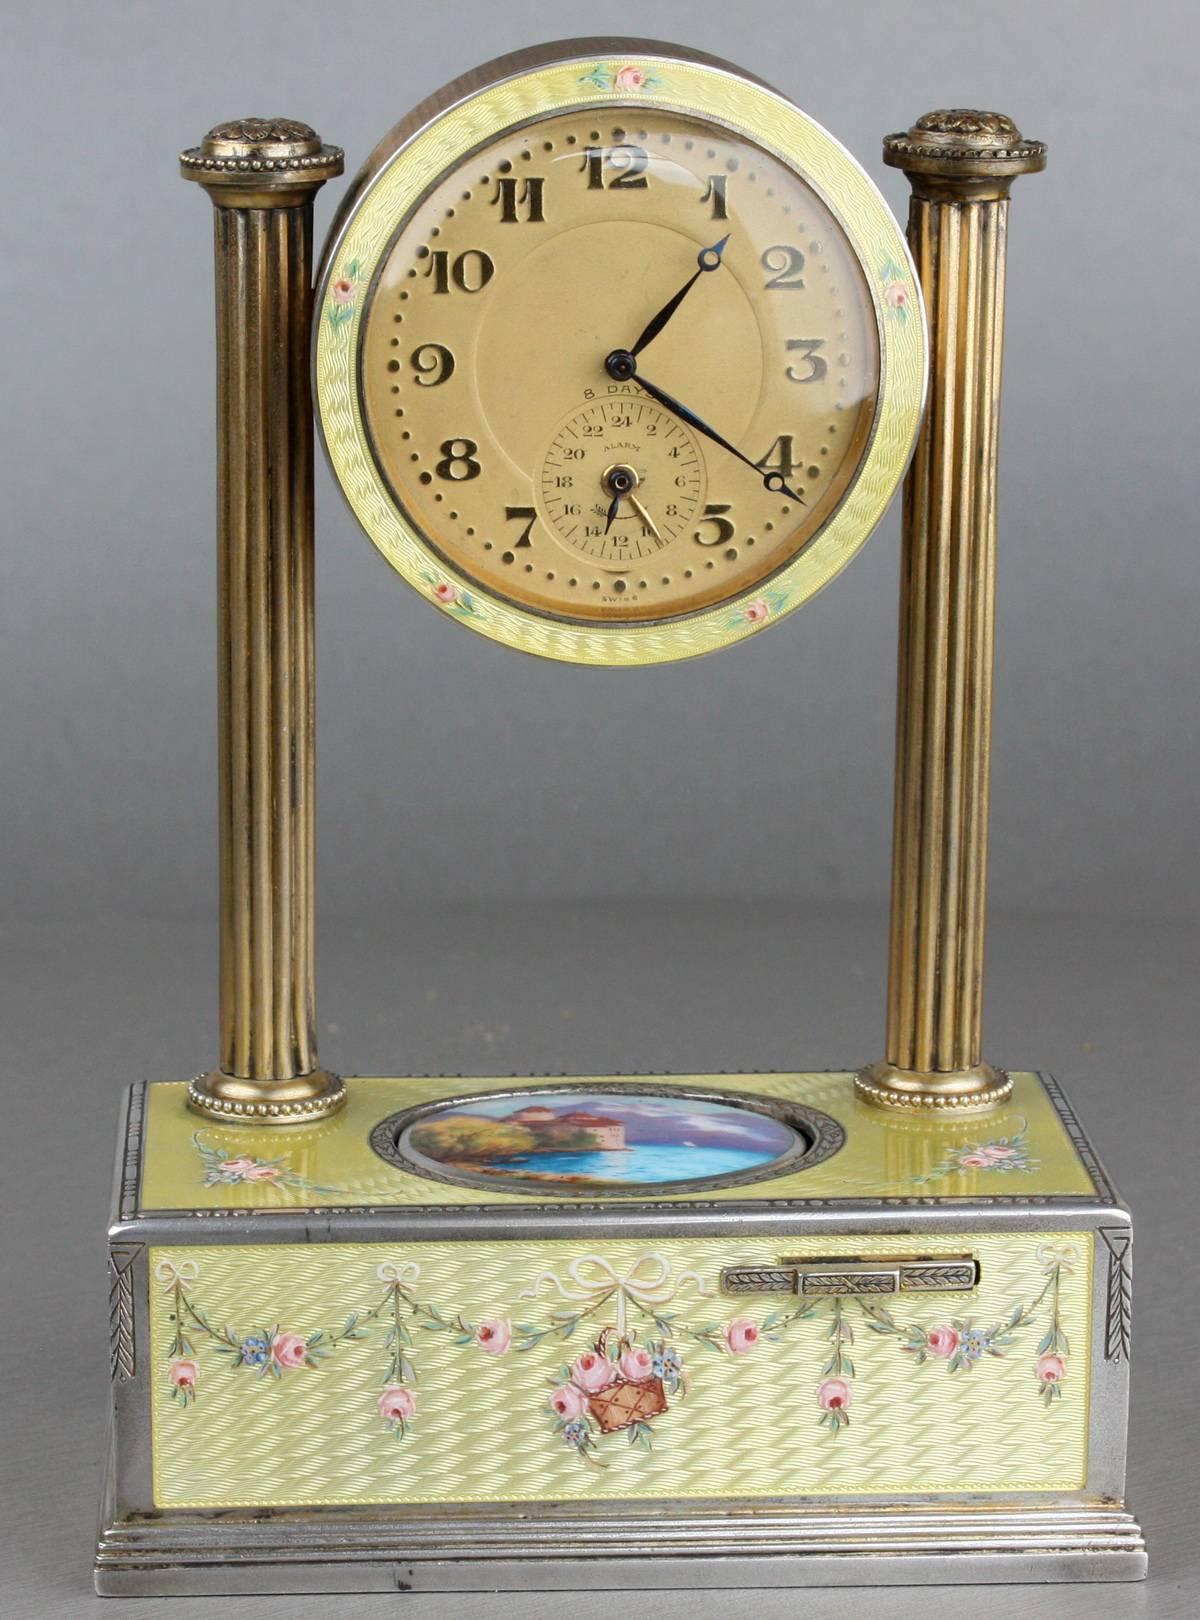 An extremely fine vintage richly-hued silver gilt, guilloche yellow enamel and pictorial enamel timepiece alarm-actuated singing bird box, by C. H. Marguerat
 
Swiss,
 
circa 1925.
 
Serial number 346.
 
Awake from your dreams the Swiss